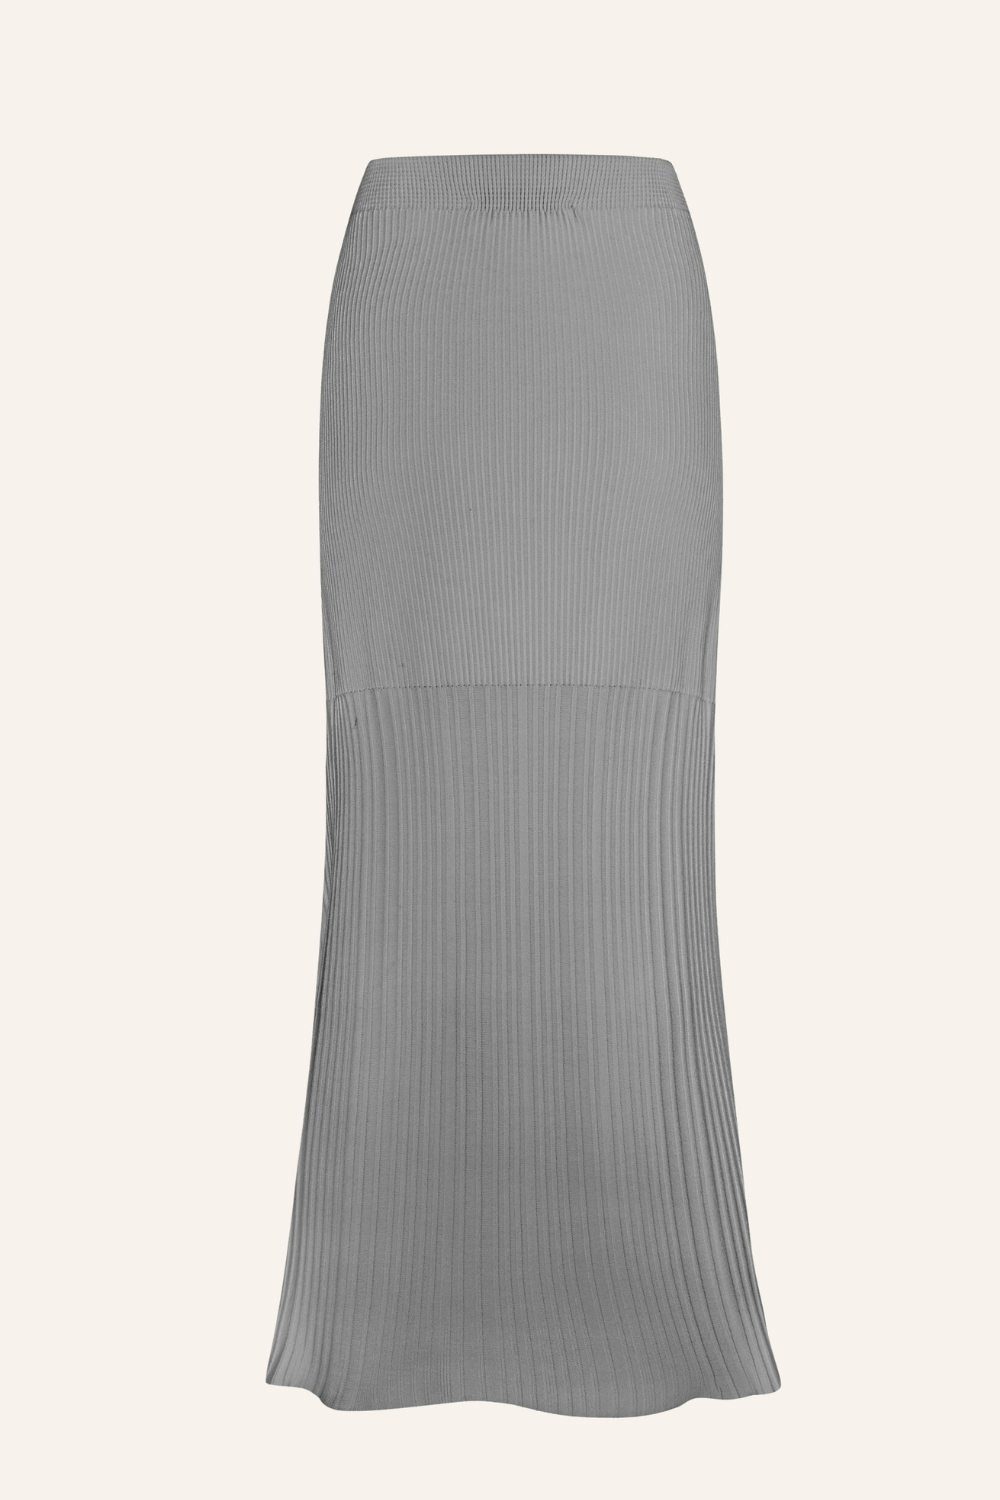 Knitted skirt, gray, (T.Mosca), UOL24-01